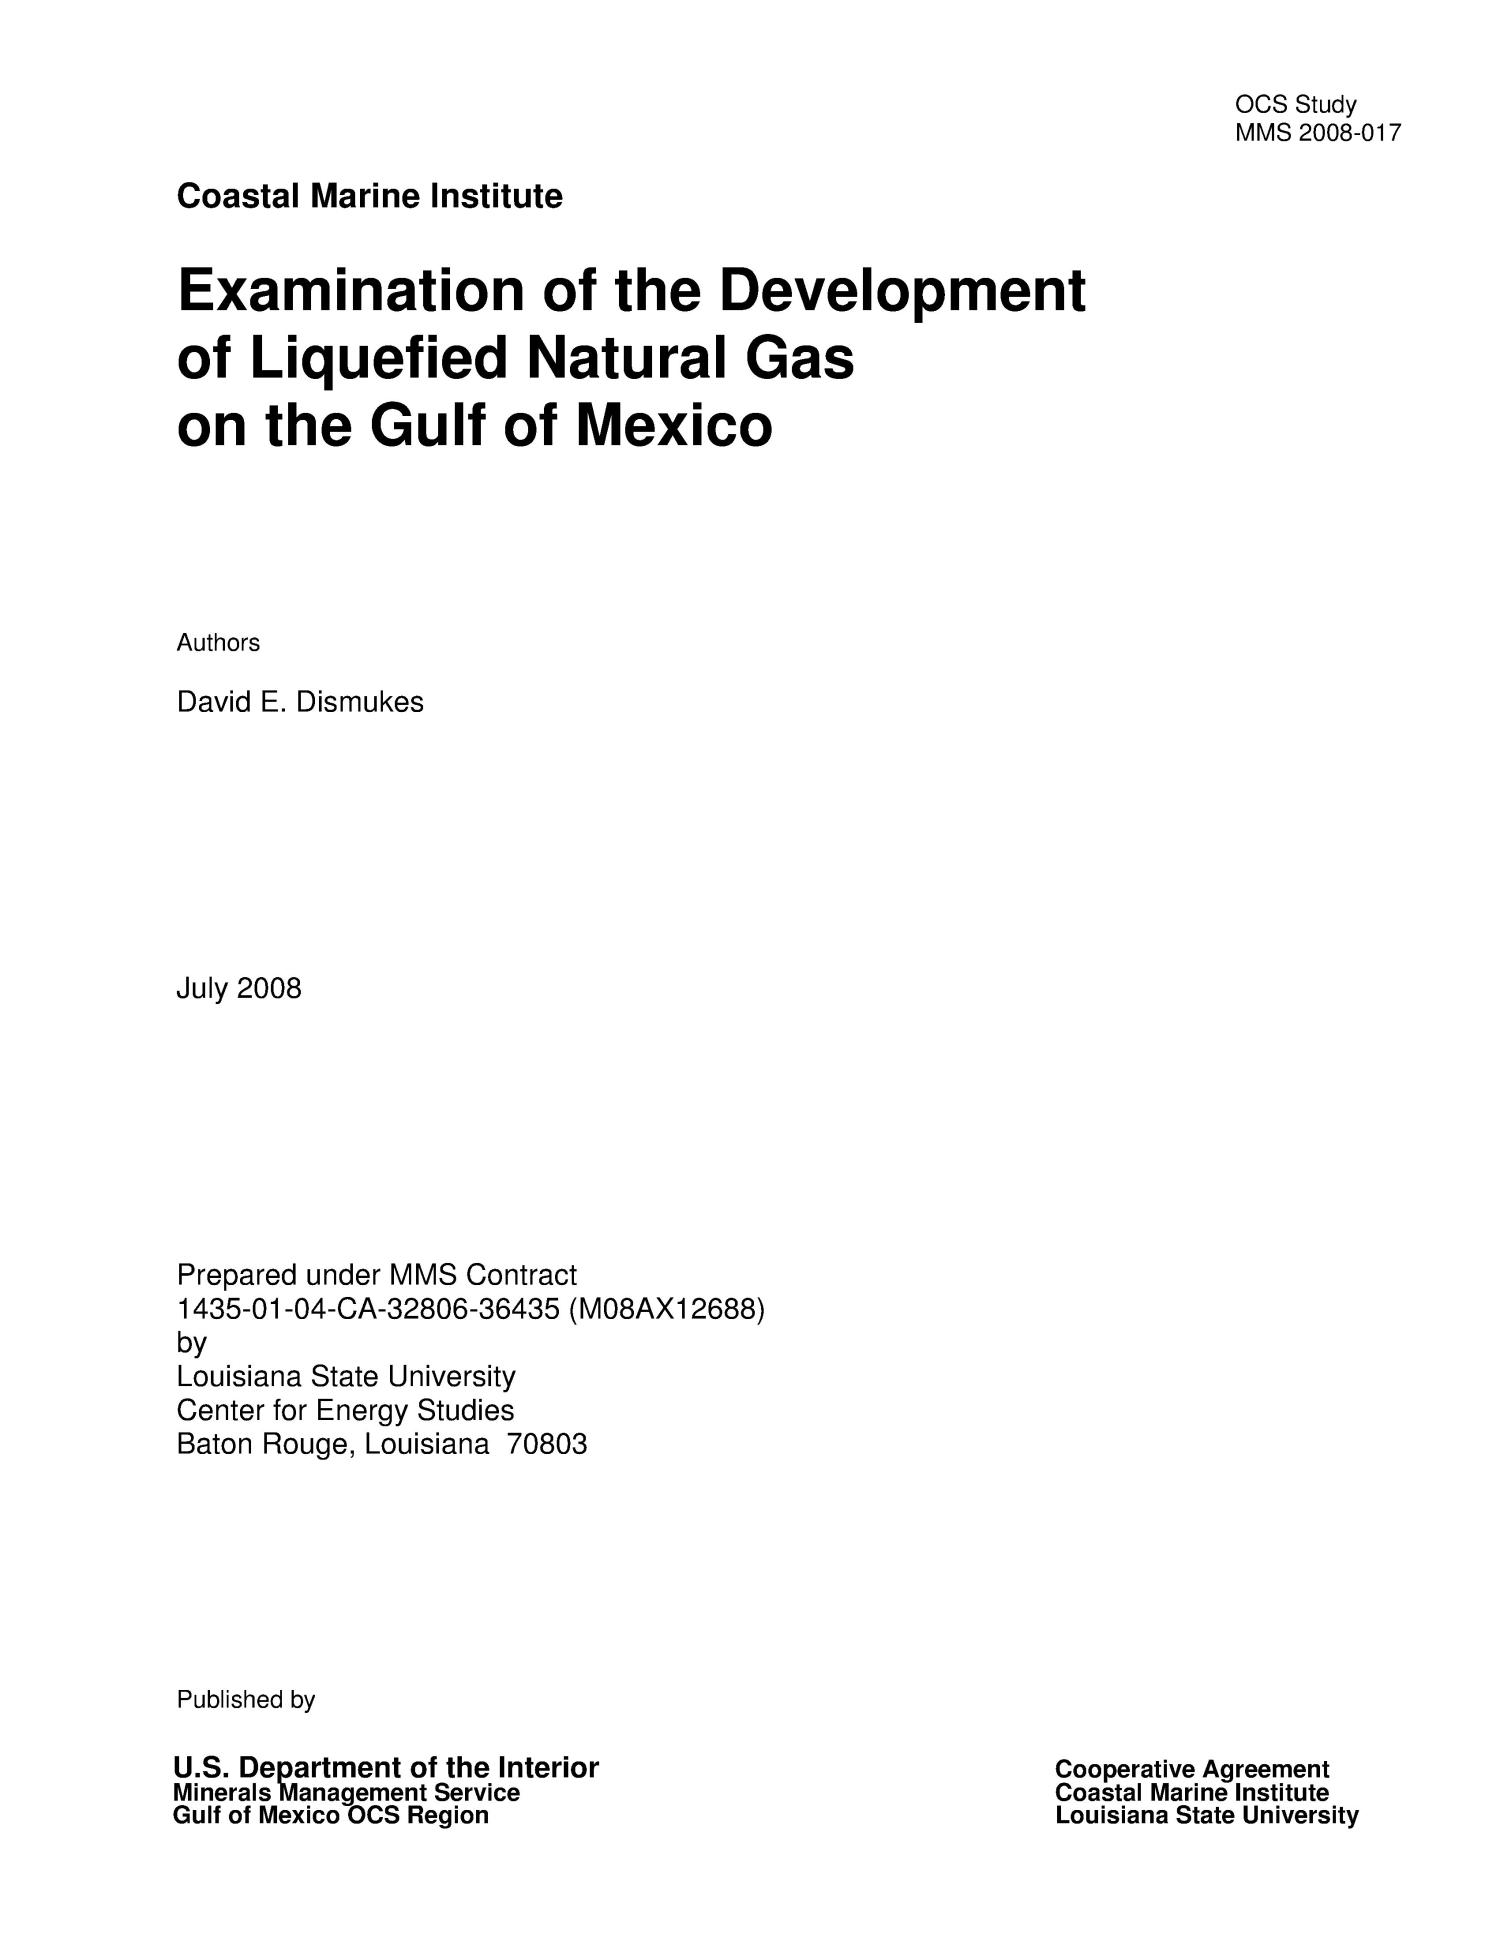 Examination of the Development of Liquefied Natural Gas on the Gulf of Mexico
                                                
                                                    [Sequence #]: 2 of 114
                                                